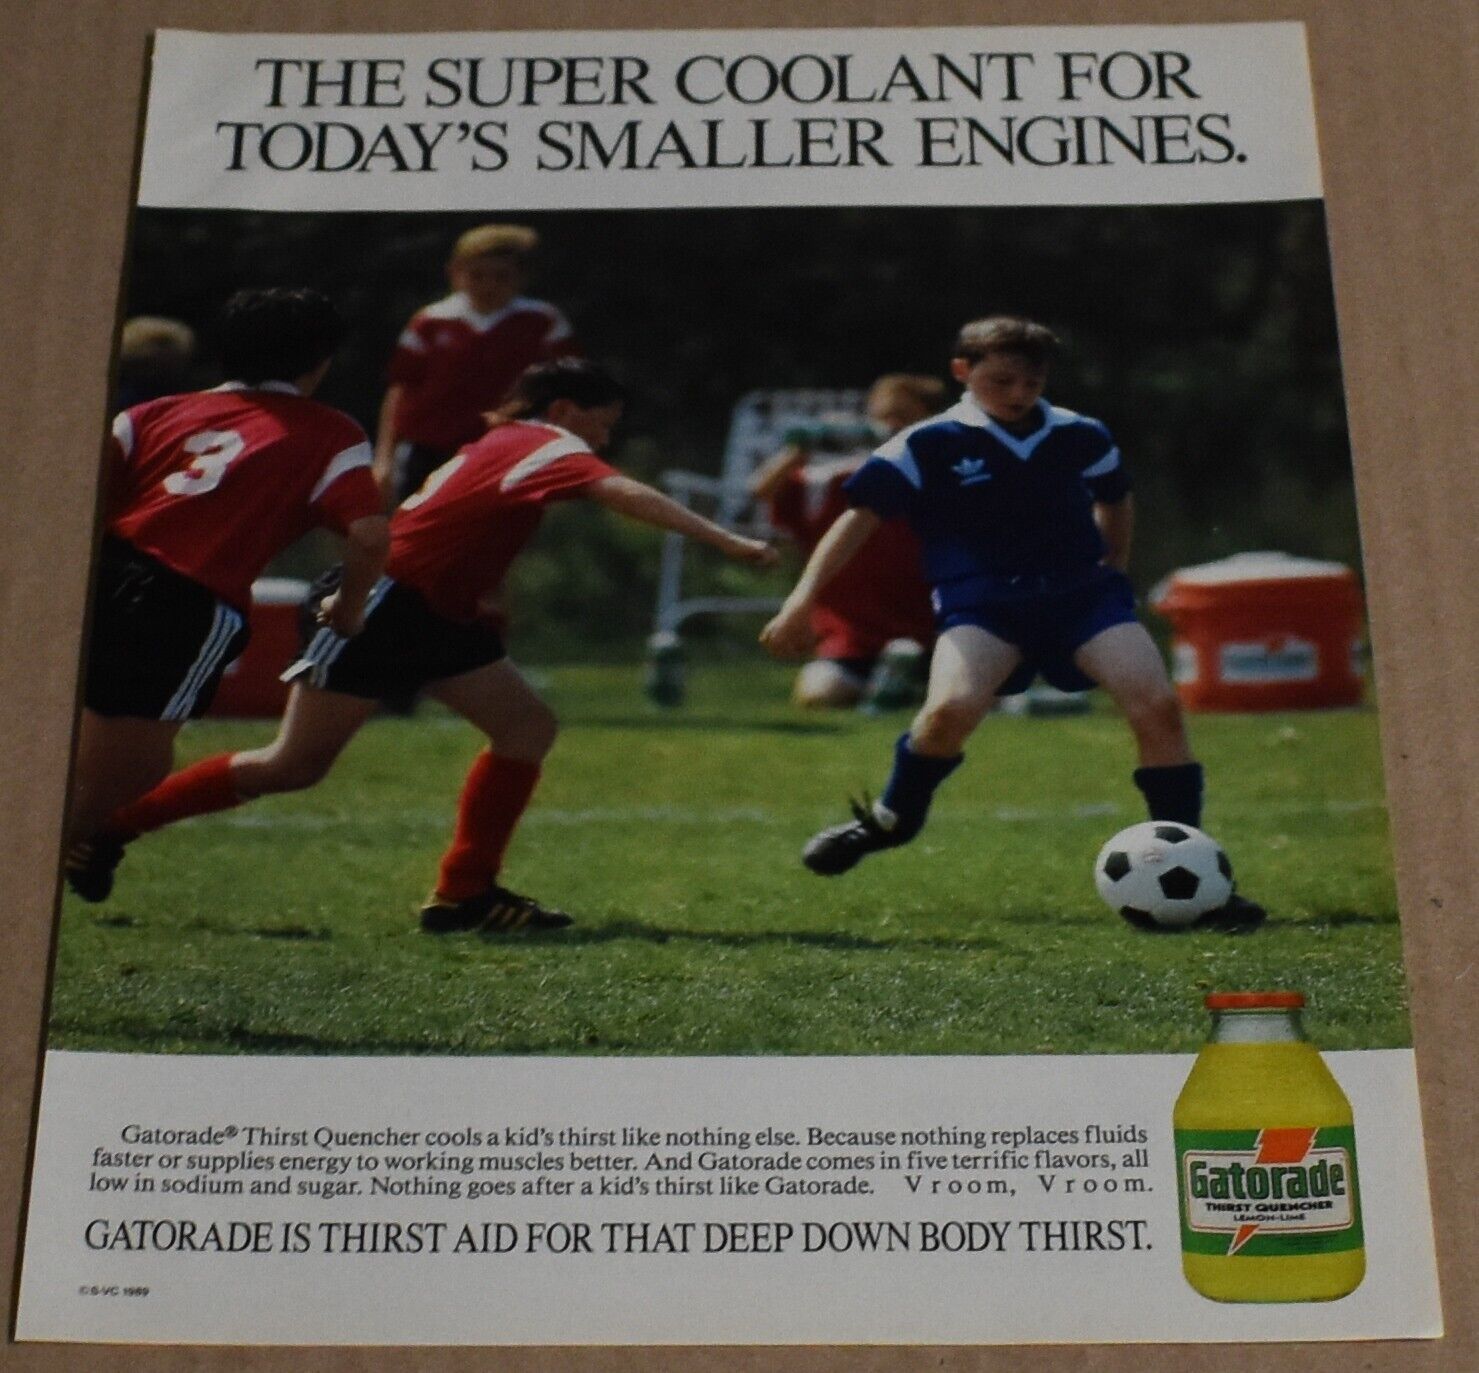 1989 Print Ad Super Coolant smaller engines Gatorade Thirst Quencher Soccer boys